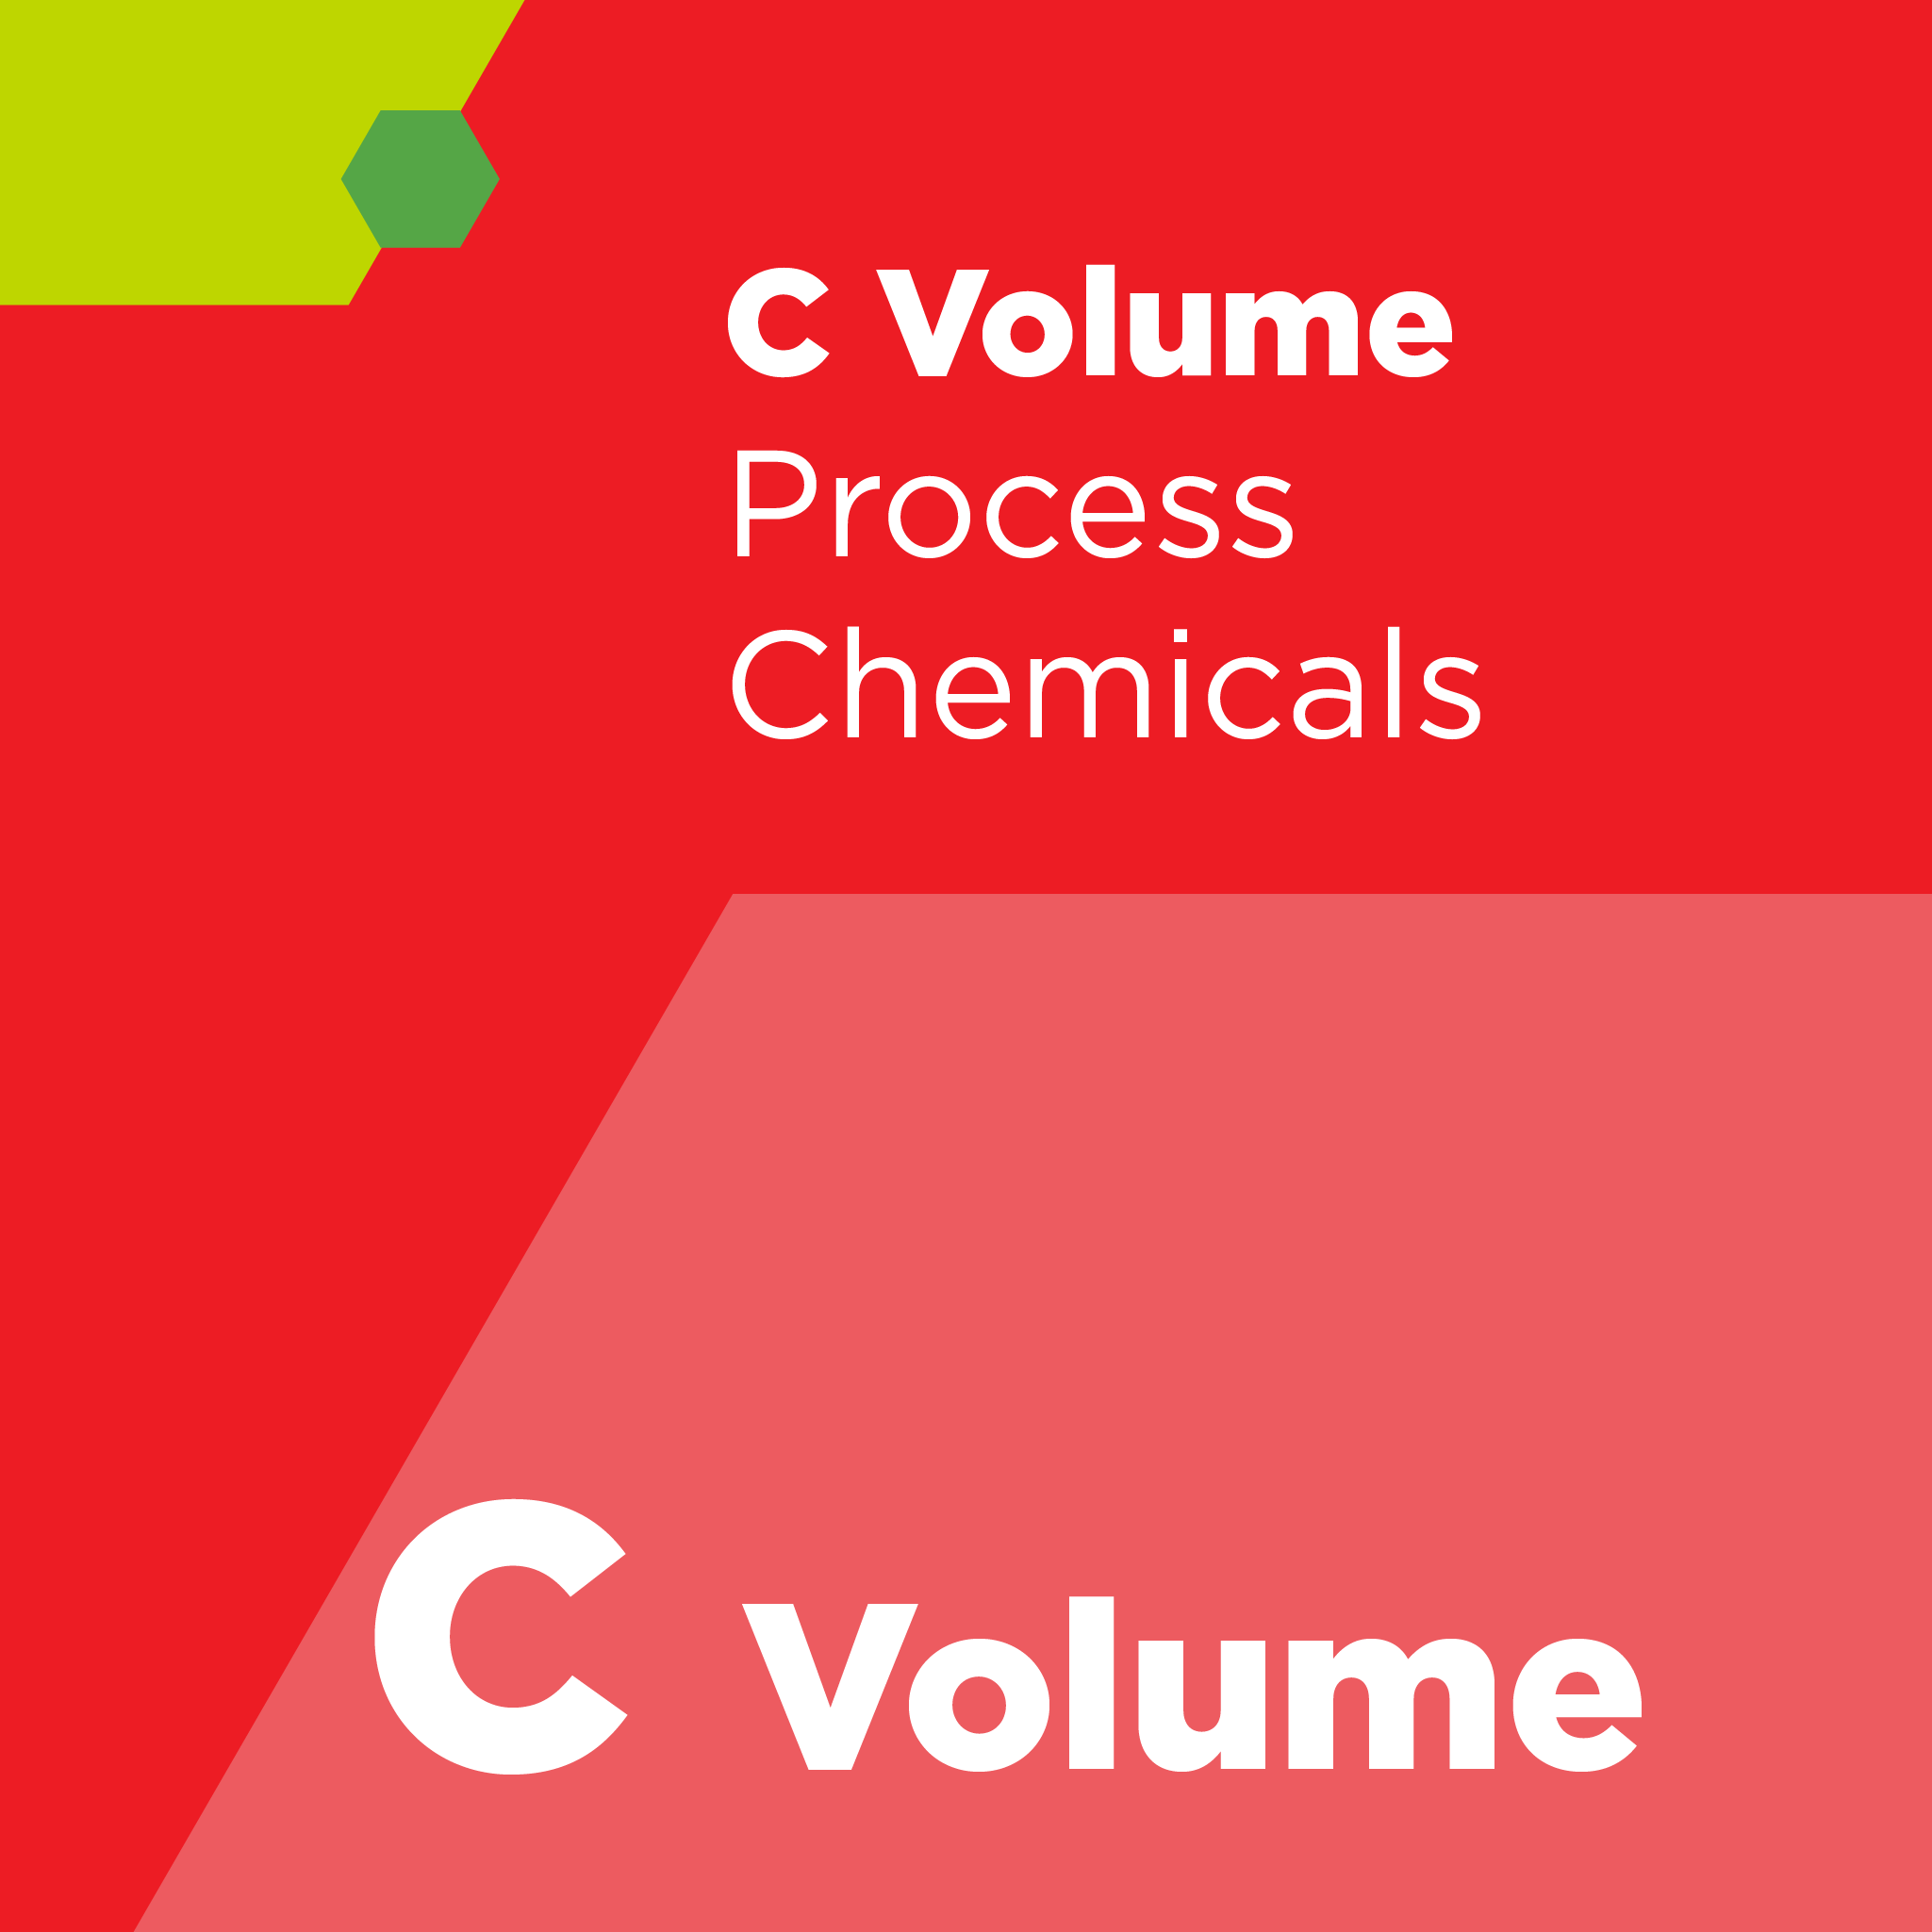 C04100 - SEMI C41 - Specification and Guide for 2-Propanol